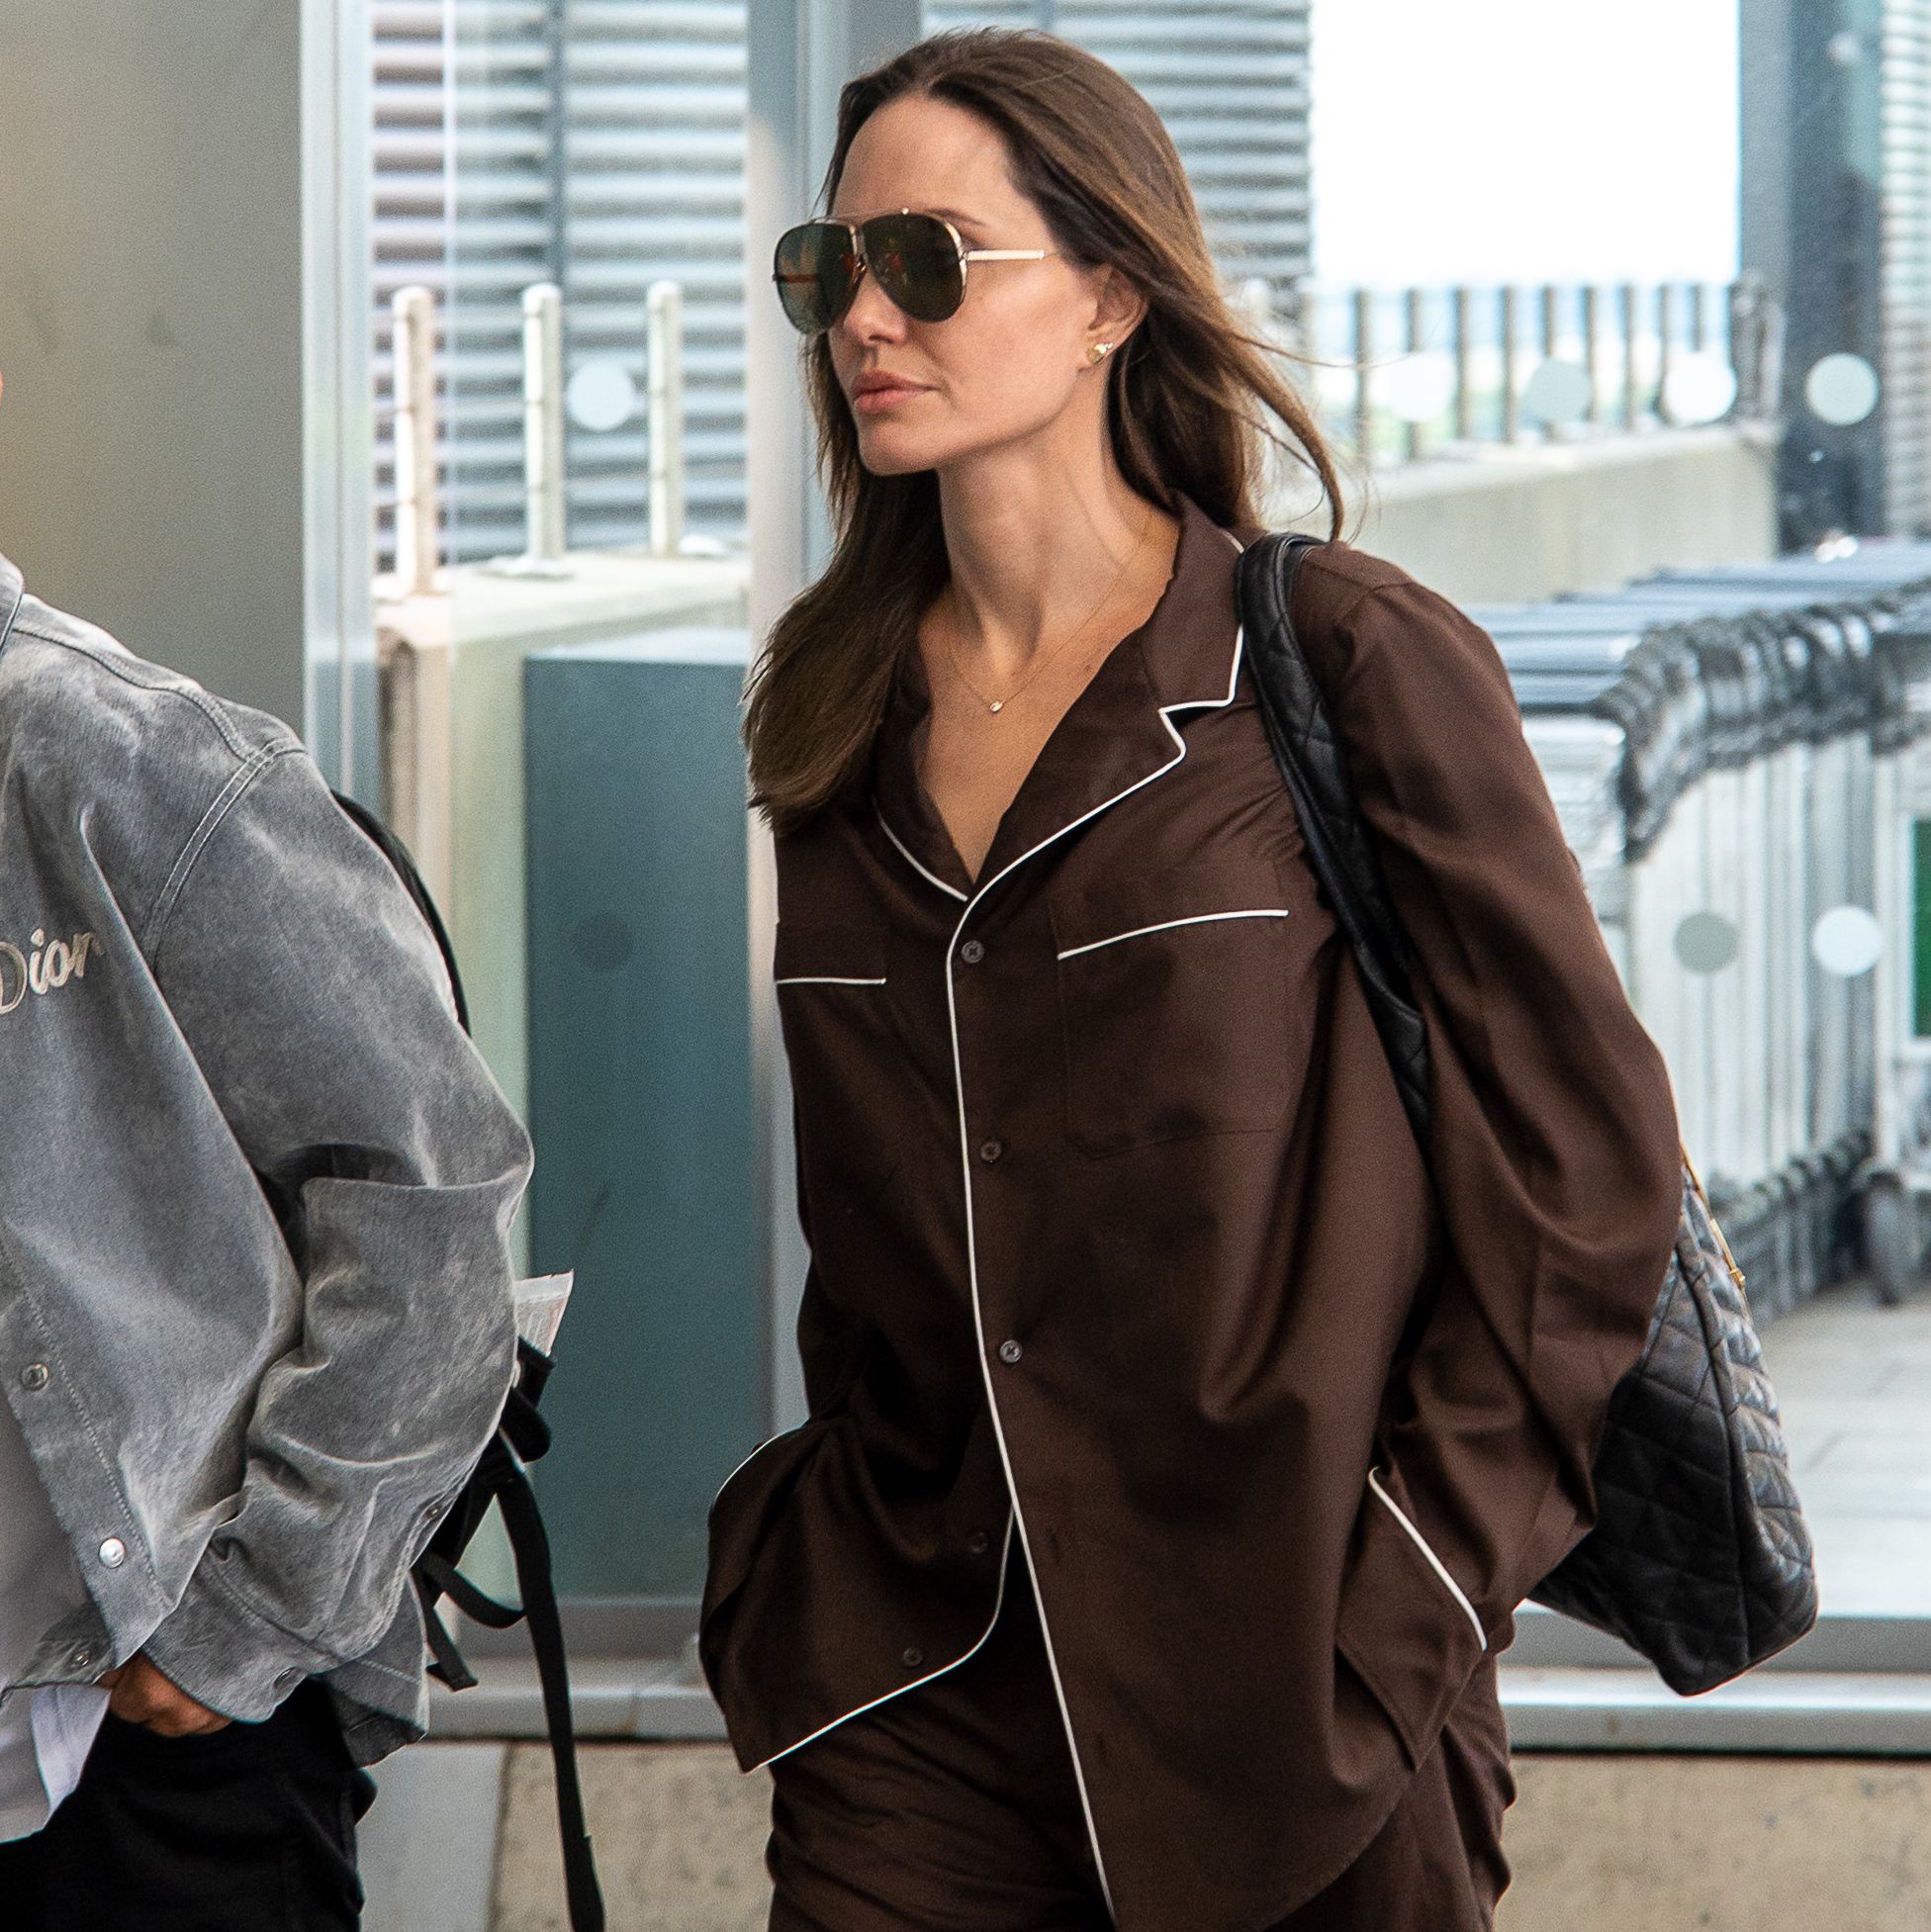 Angelina Jolie's Luxe Airport Outfit Involves a Valentino Pajama Set